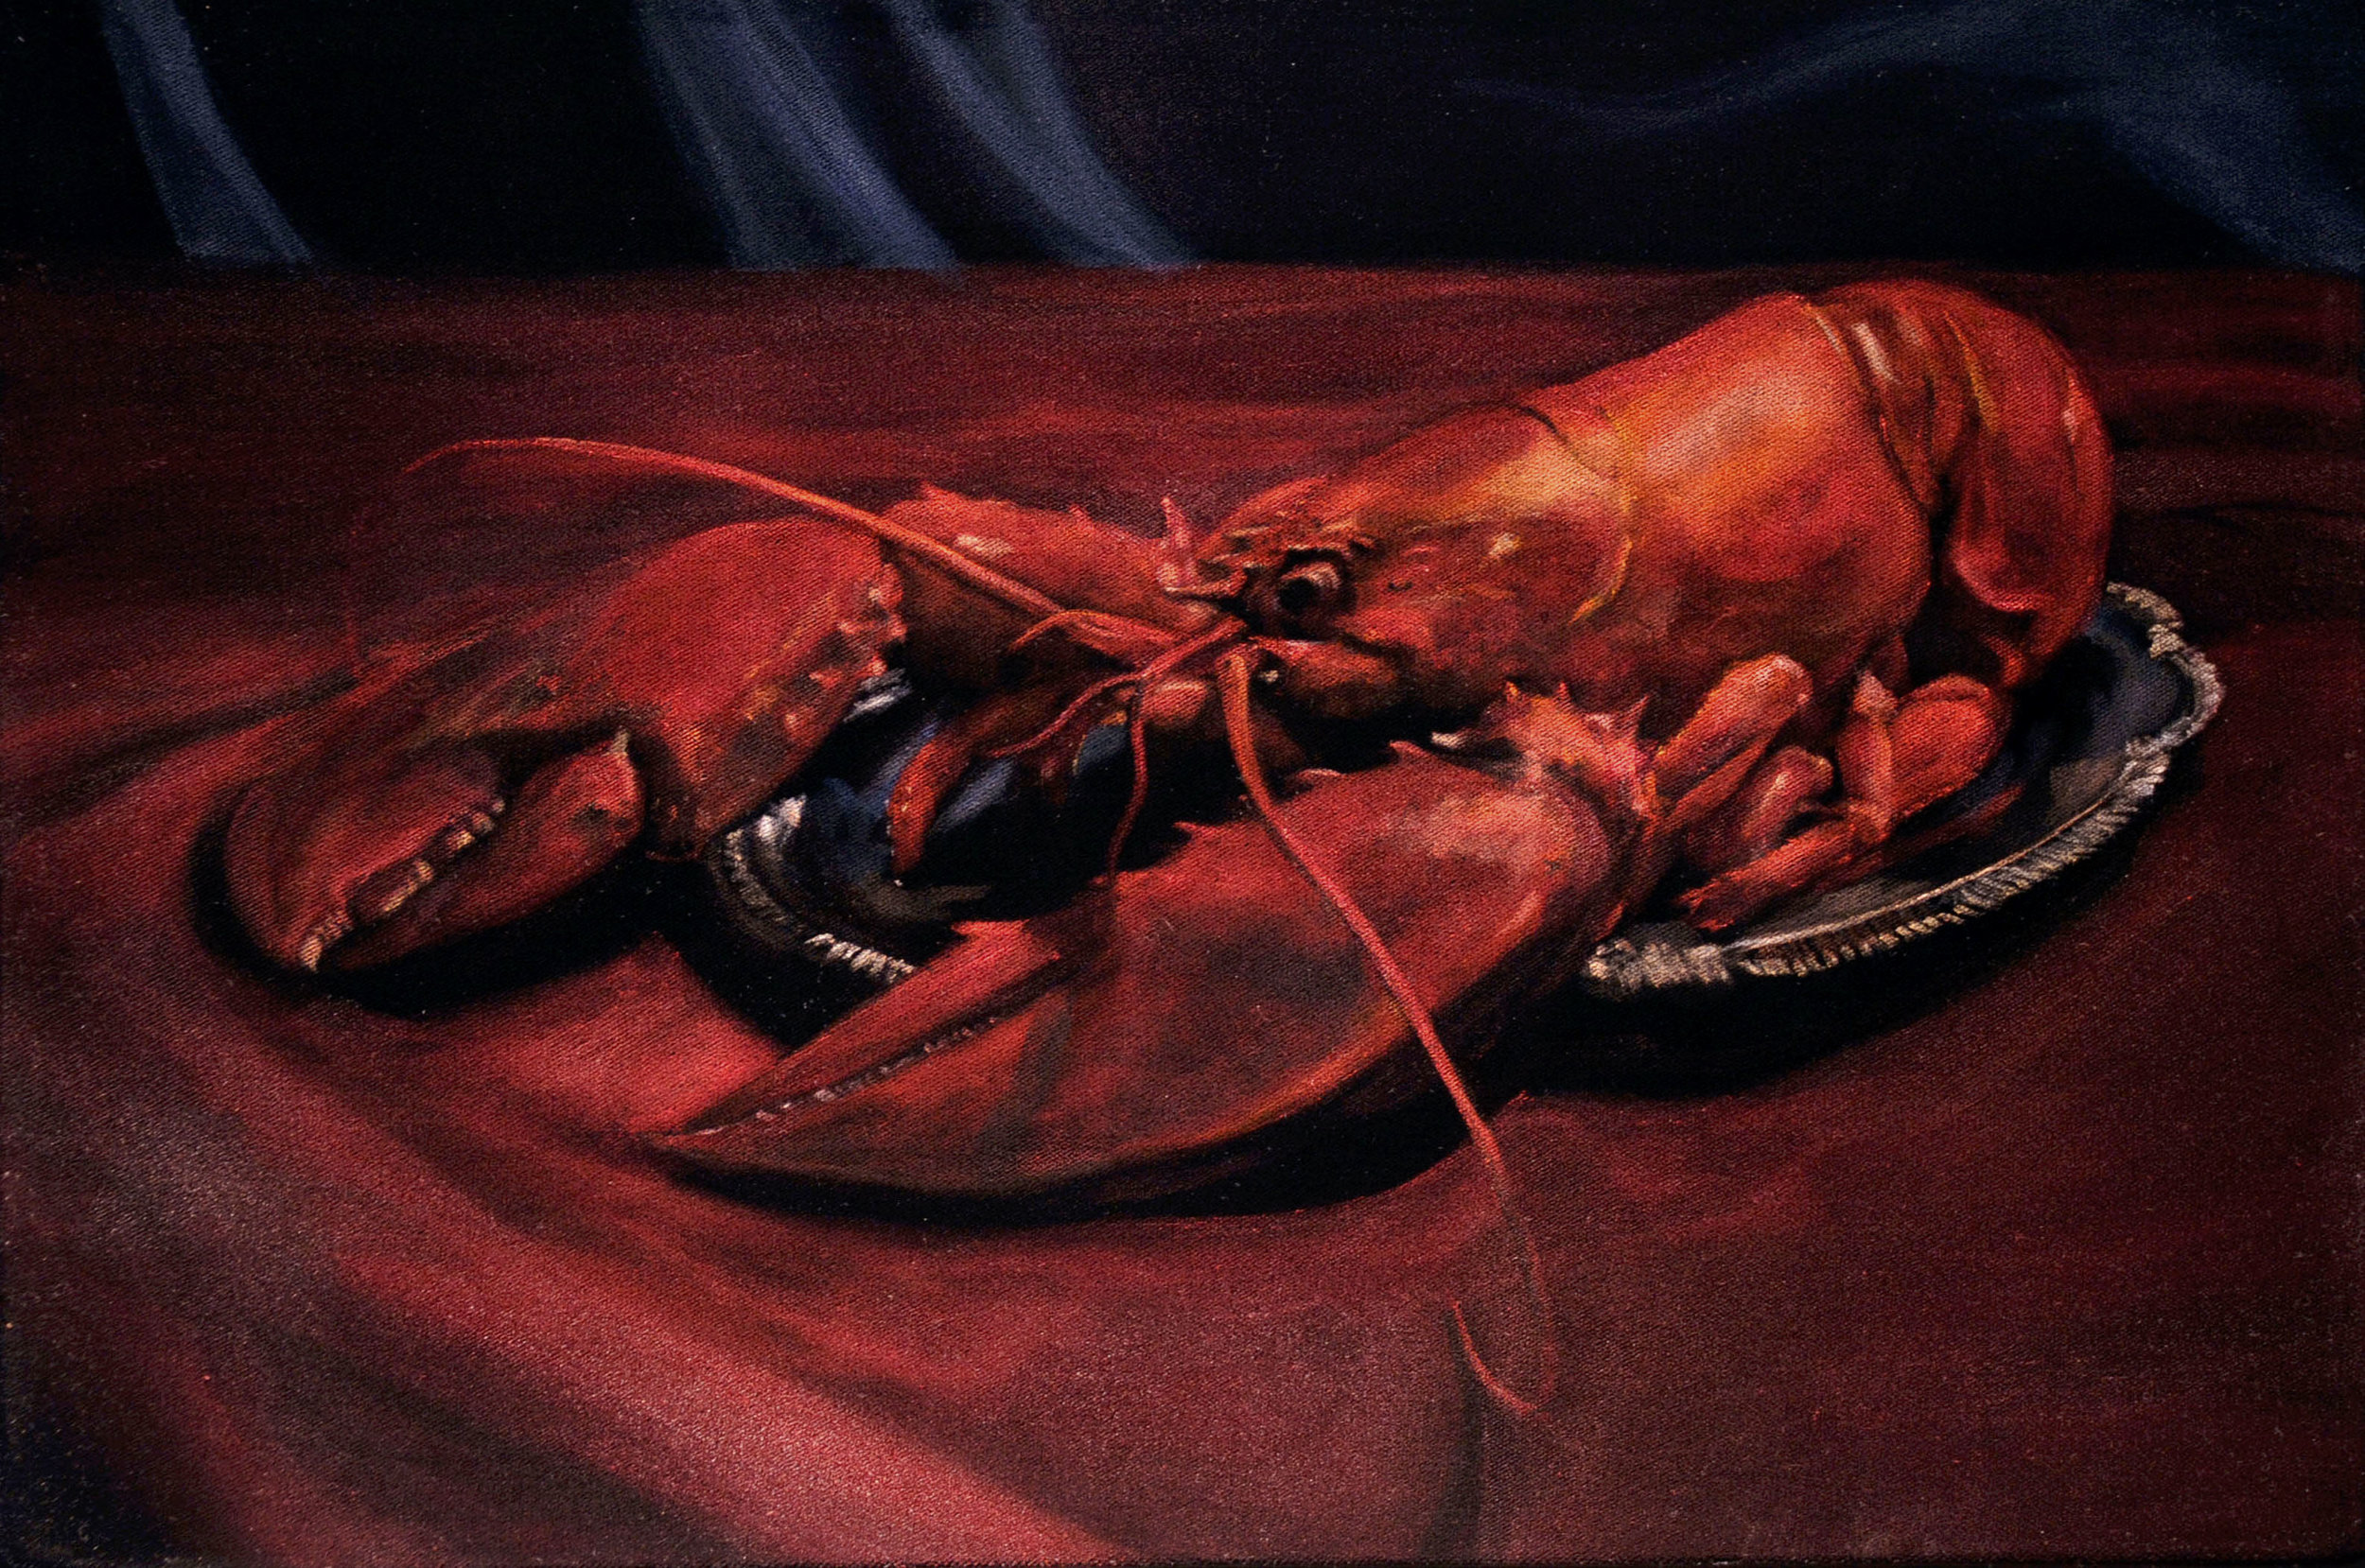  Lobster (apologies to Jacob Lawrence)  acrylic on velvet  12 x 18 inches 